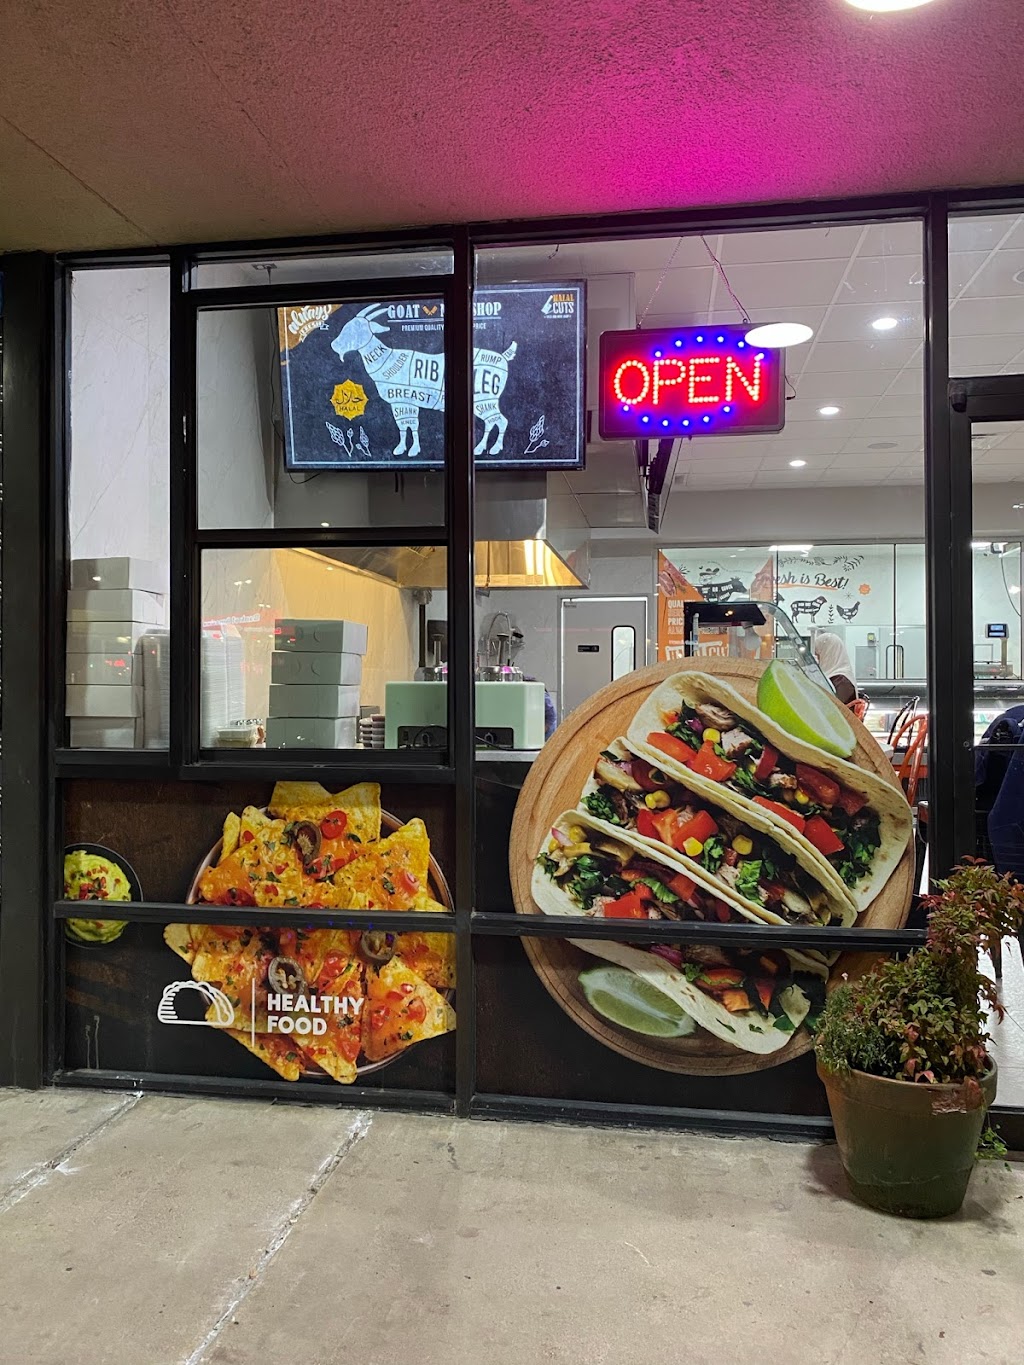 Halal Cuts Taco Restaurant and Meat Shop | 3642 N Belt Line Rd, Irving, TX 75062, USA | Phone: (469) 382-4243